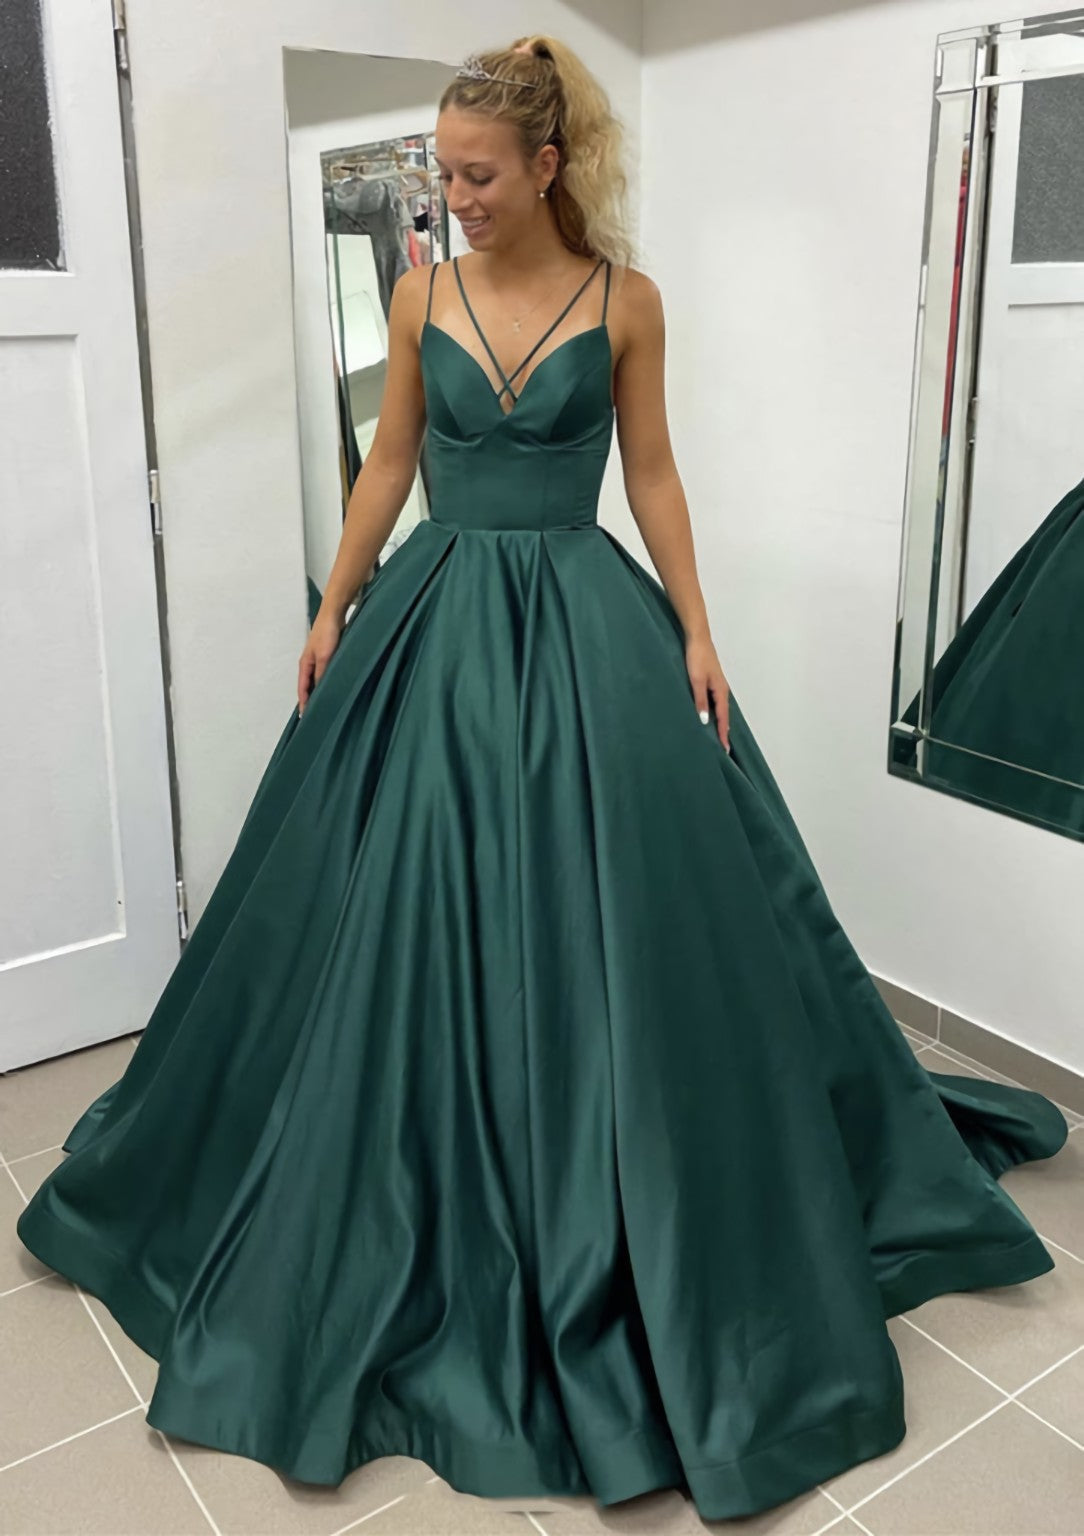 Ball Gown Sleeveless Scalloped Neck Sweep Train Satin Corset Prom Dress With Pleated Pockets Gowns, Prom Dresses Pink